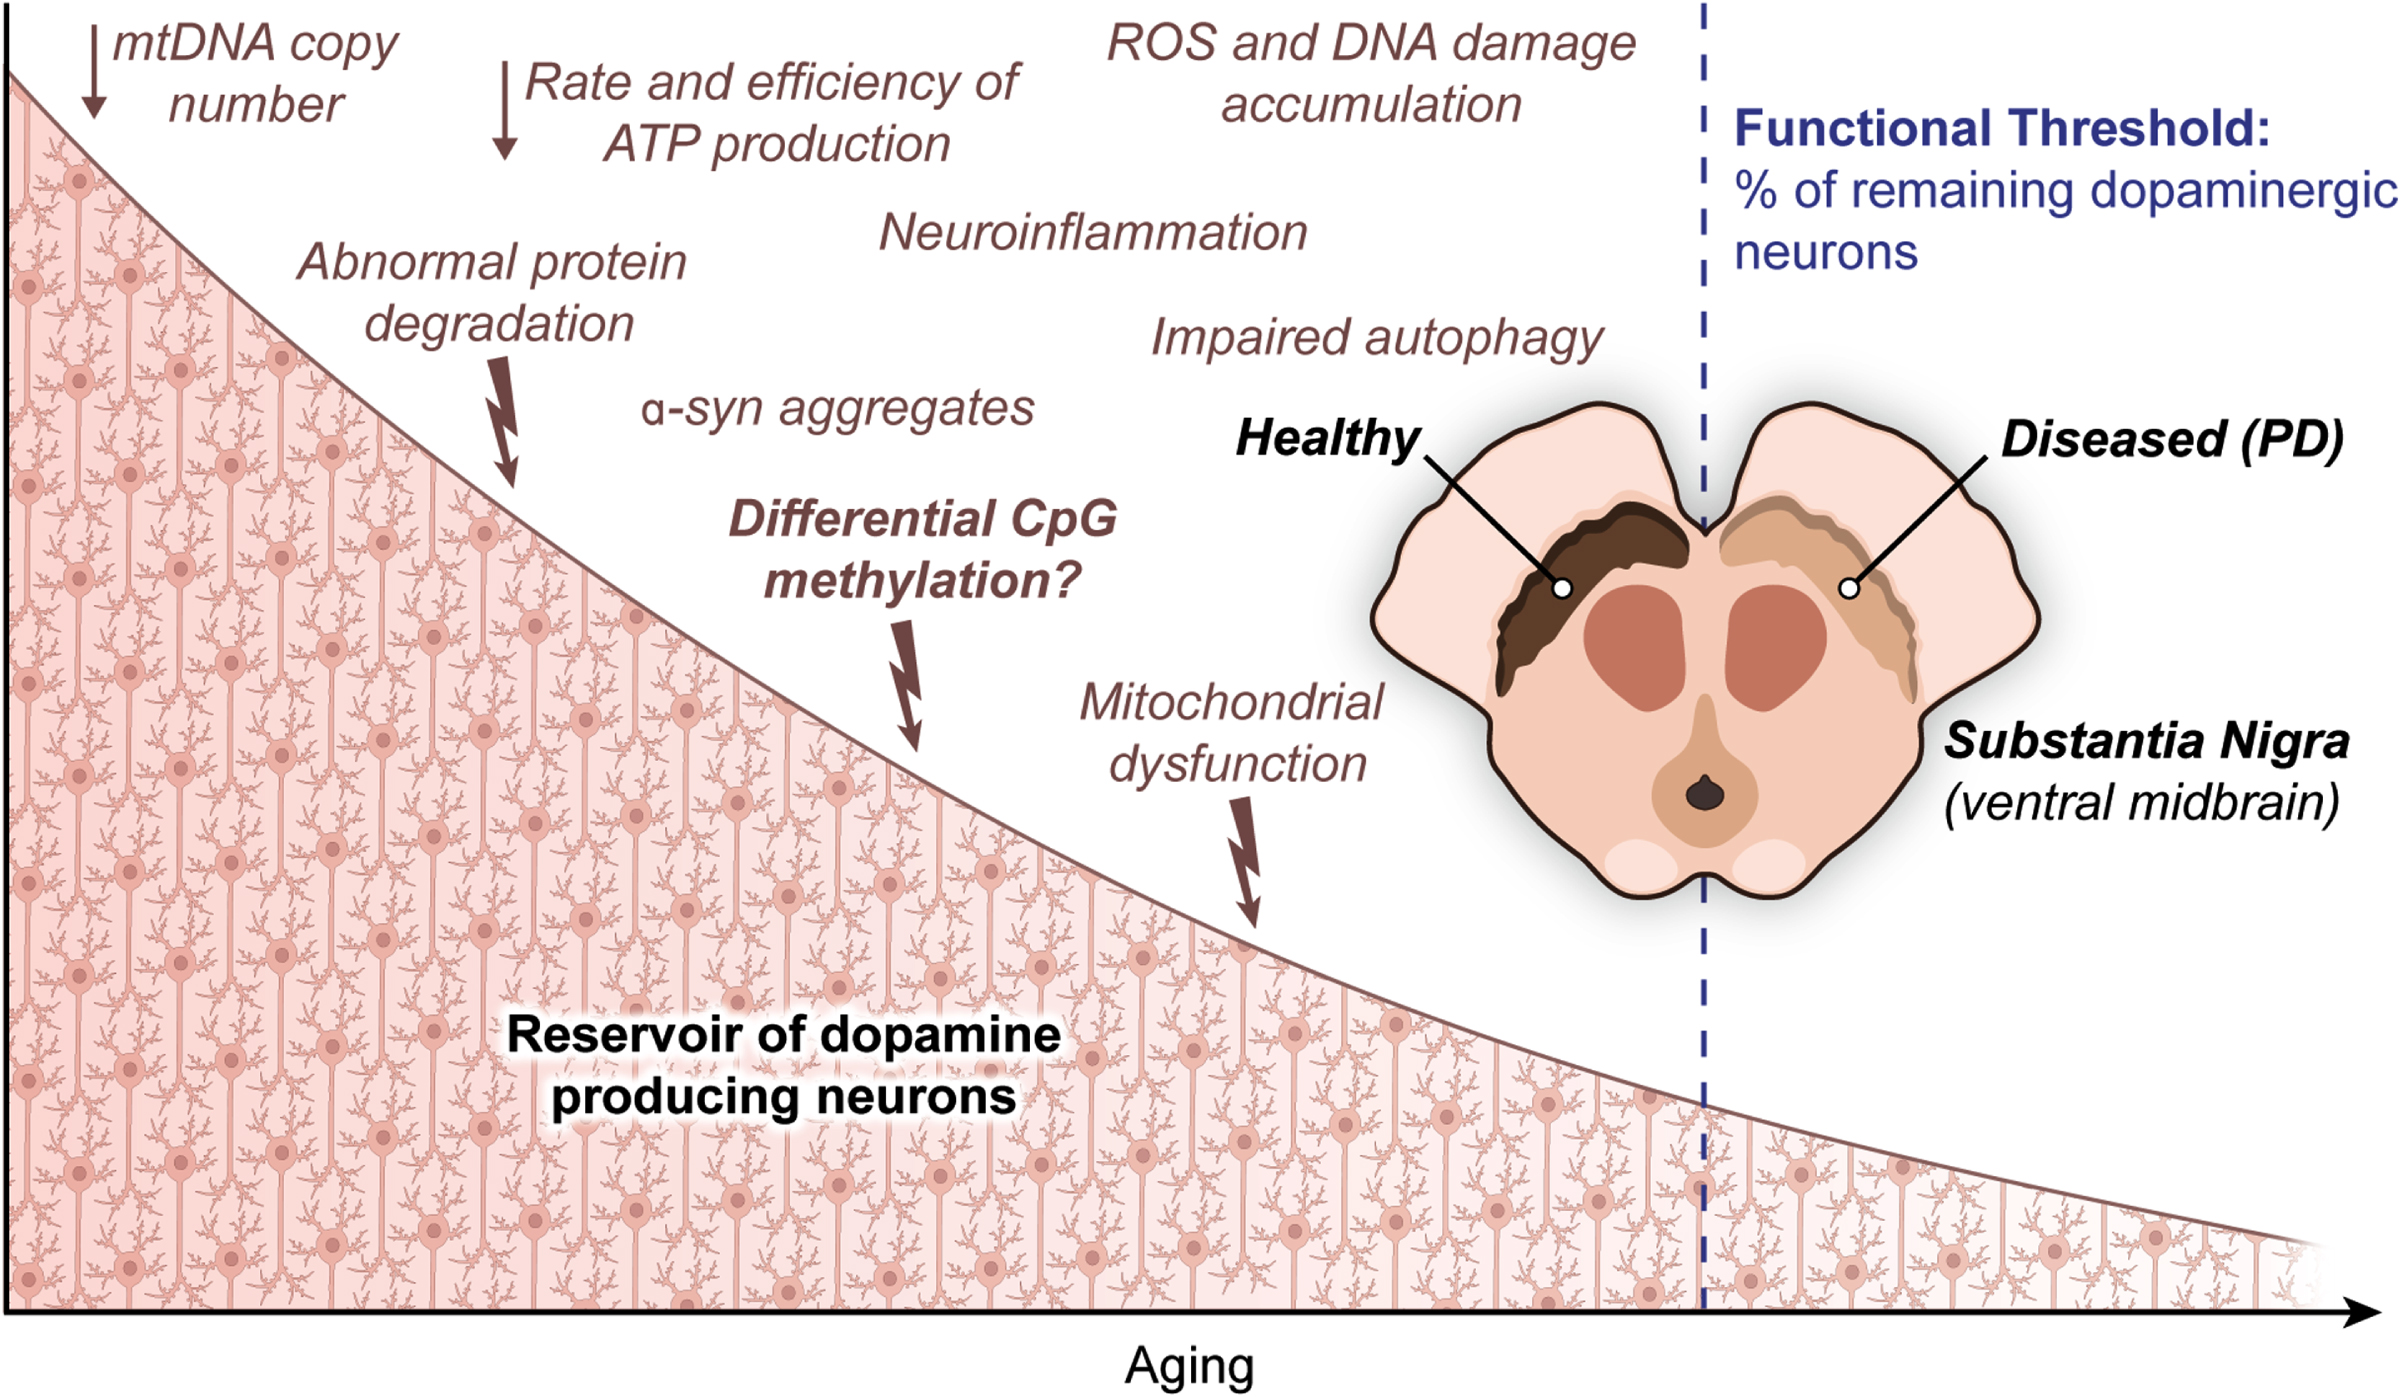 Carousel Figure: Dynamic DNA methylation in aging and Parkinson’s Disease.